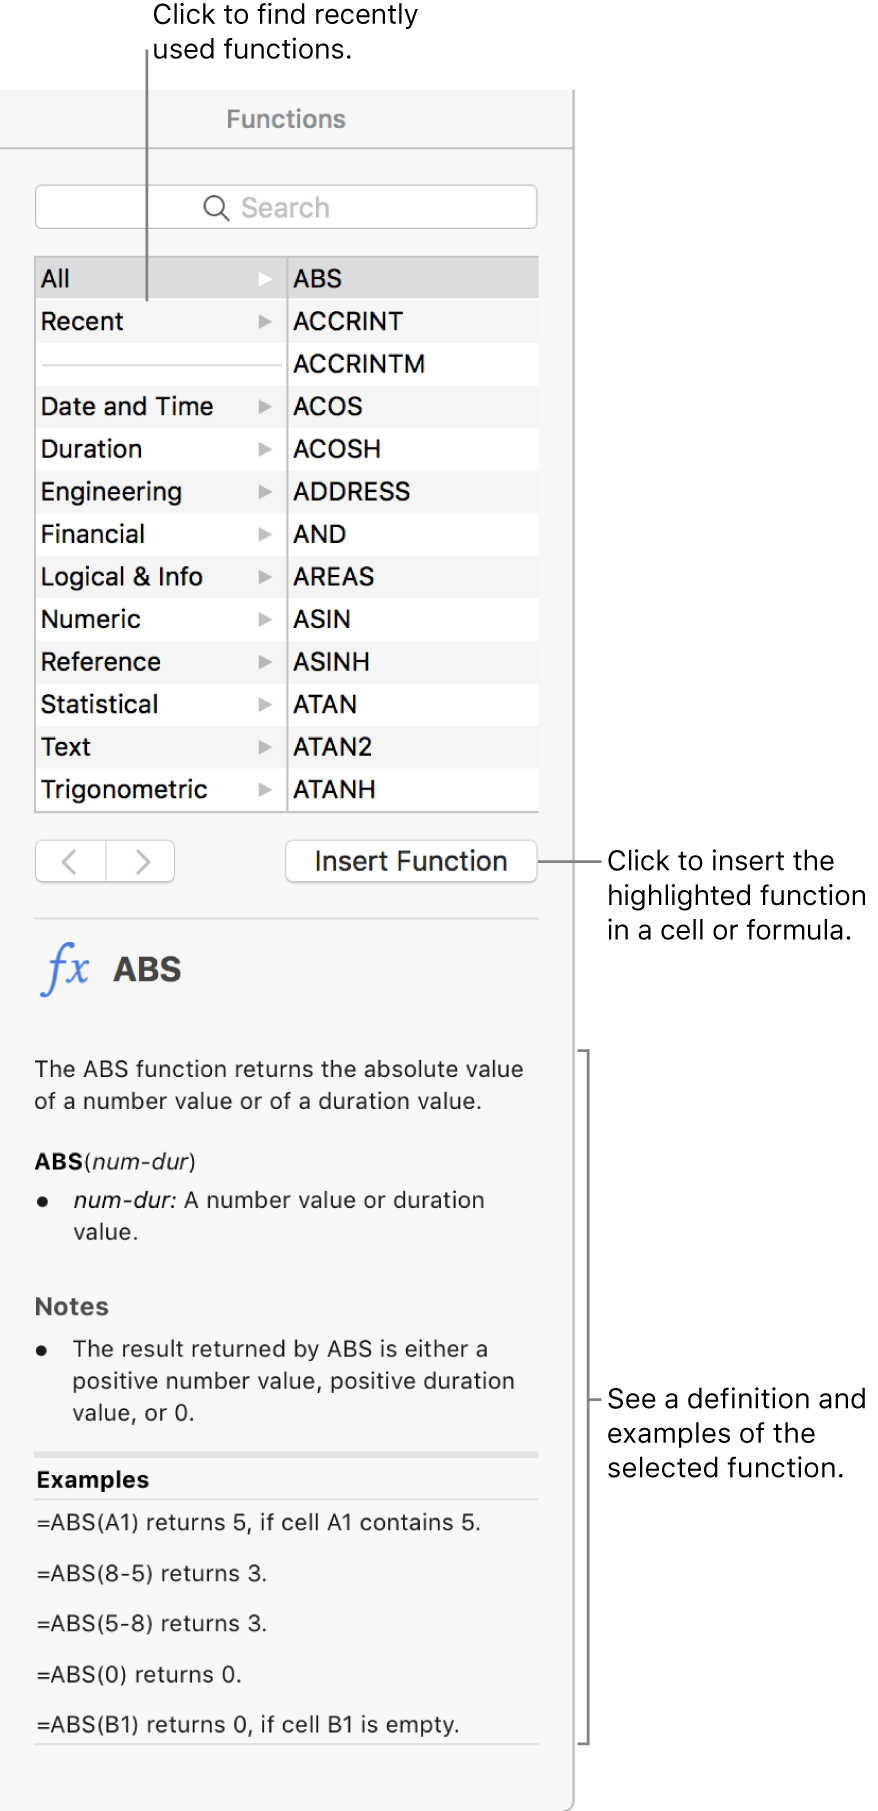 The Functions Browser with callouts to recently used functions, the Insert Function button, and the function definition.